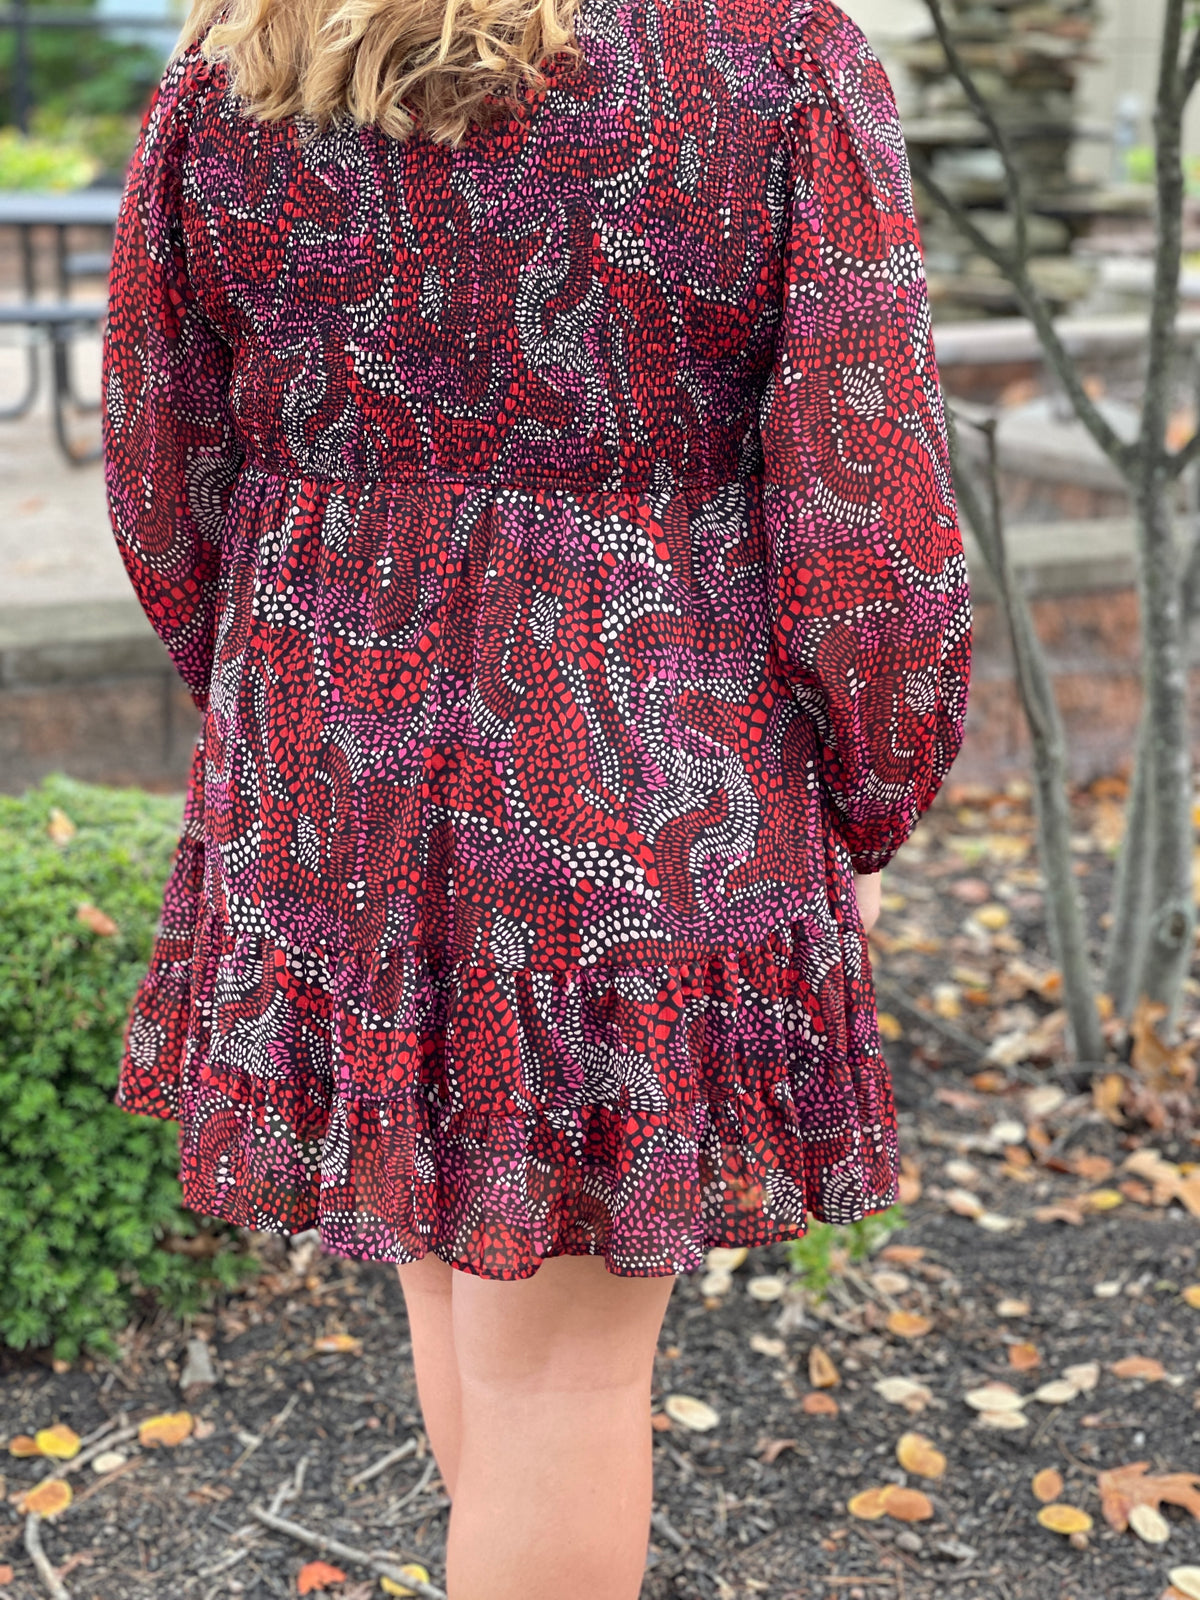 RED MIXED PRINTED SMOCKED TOP DRESS